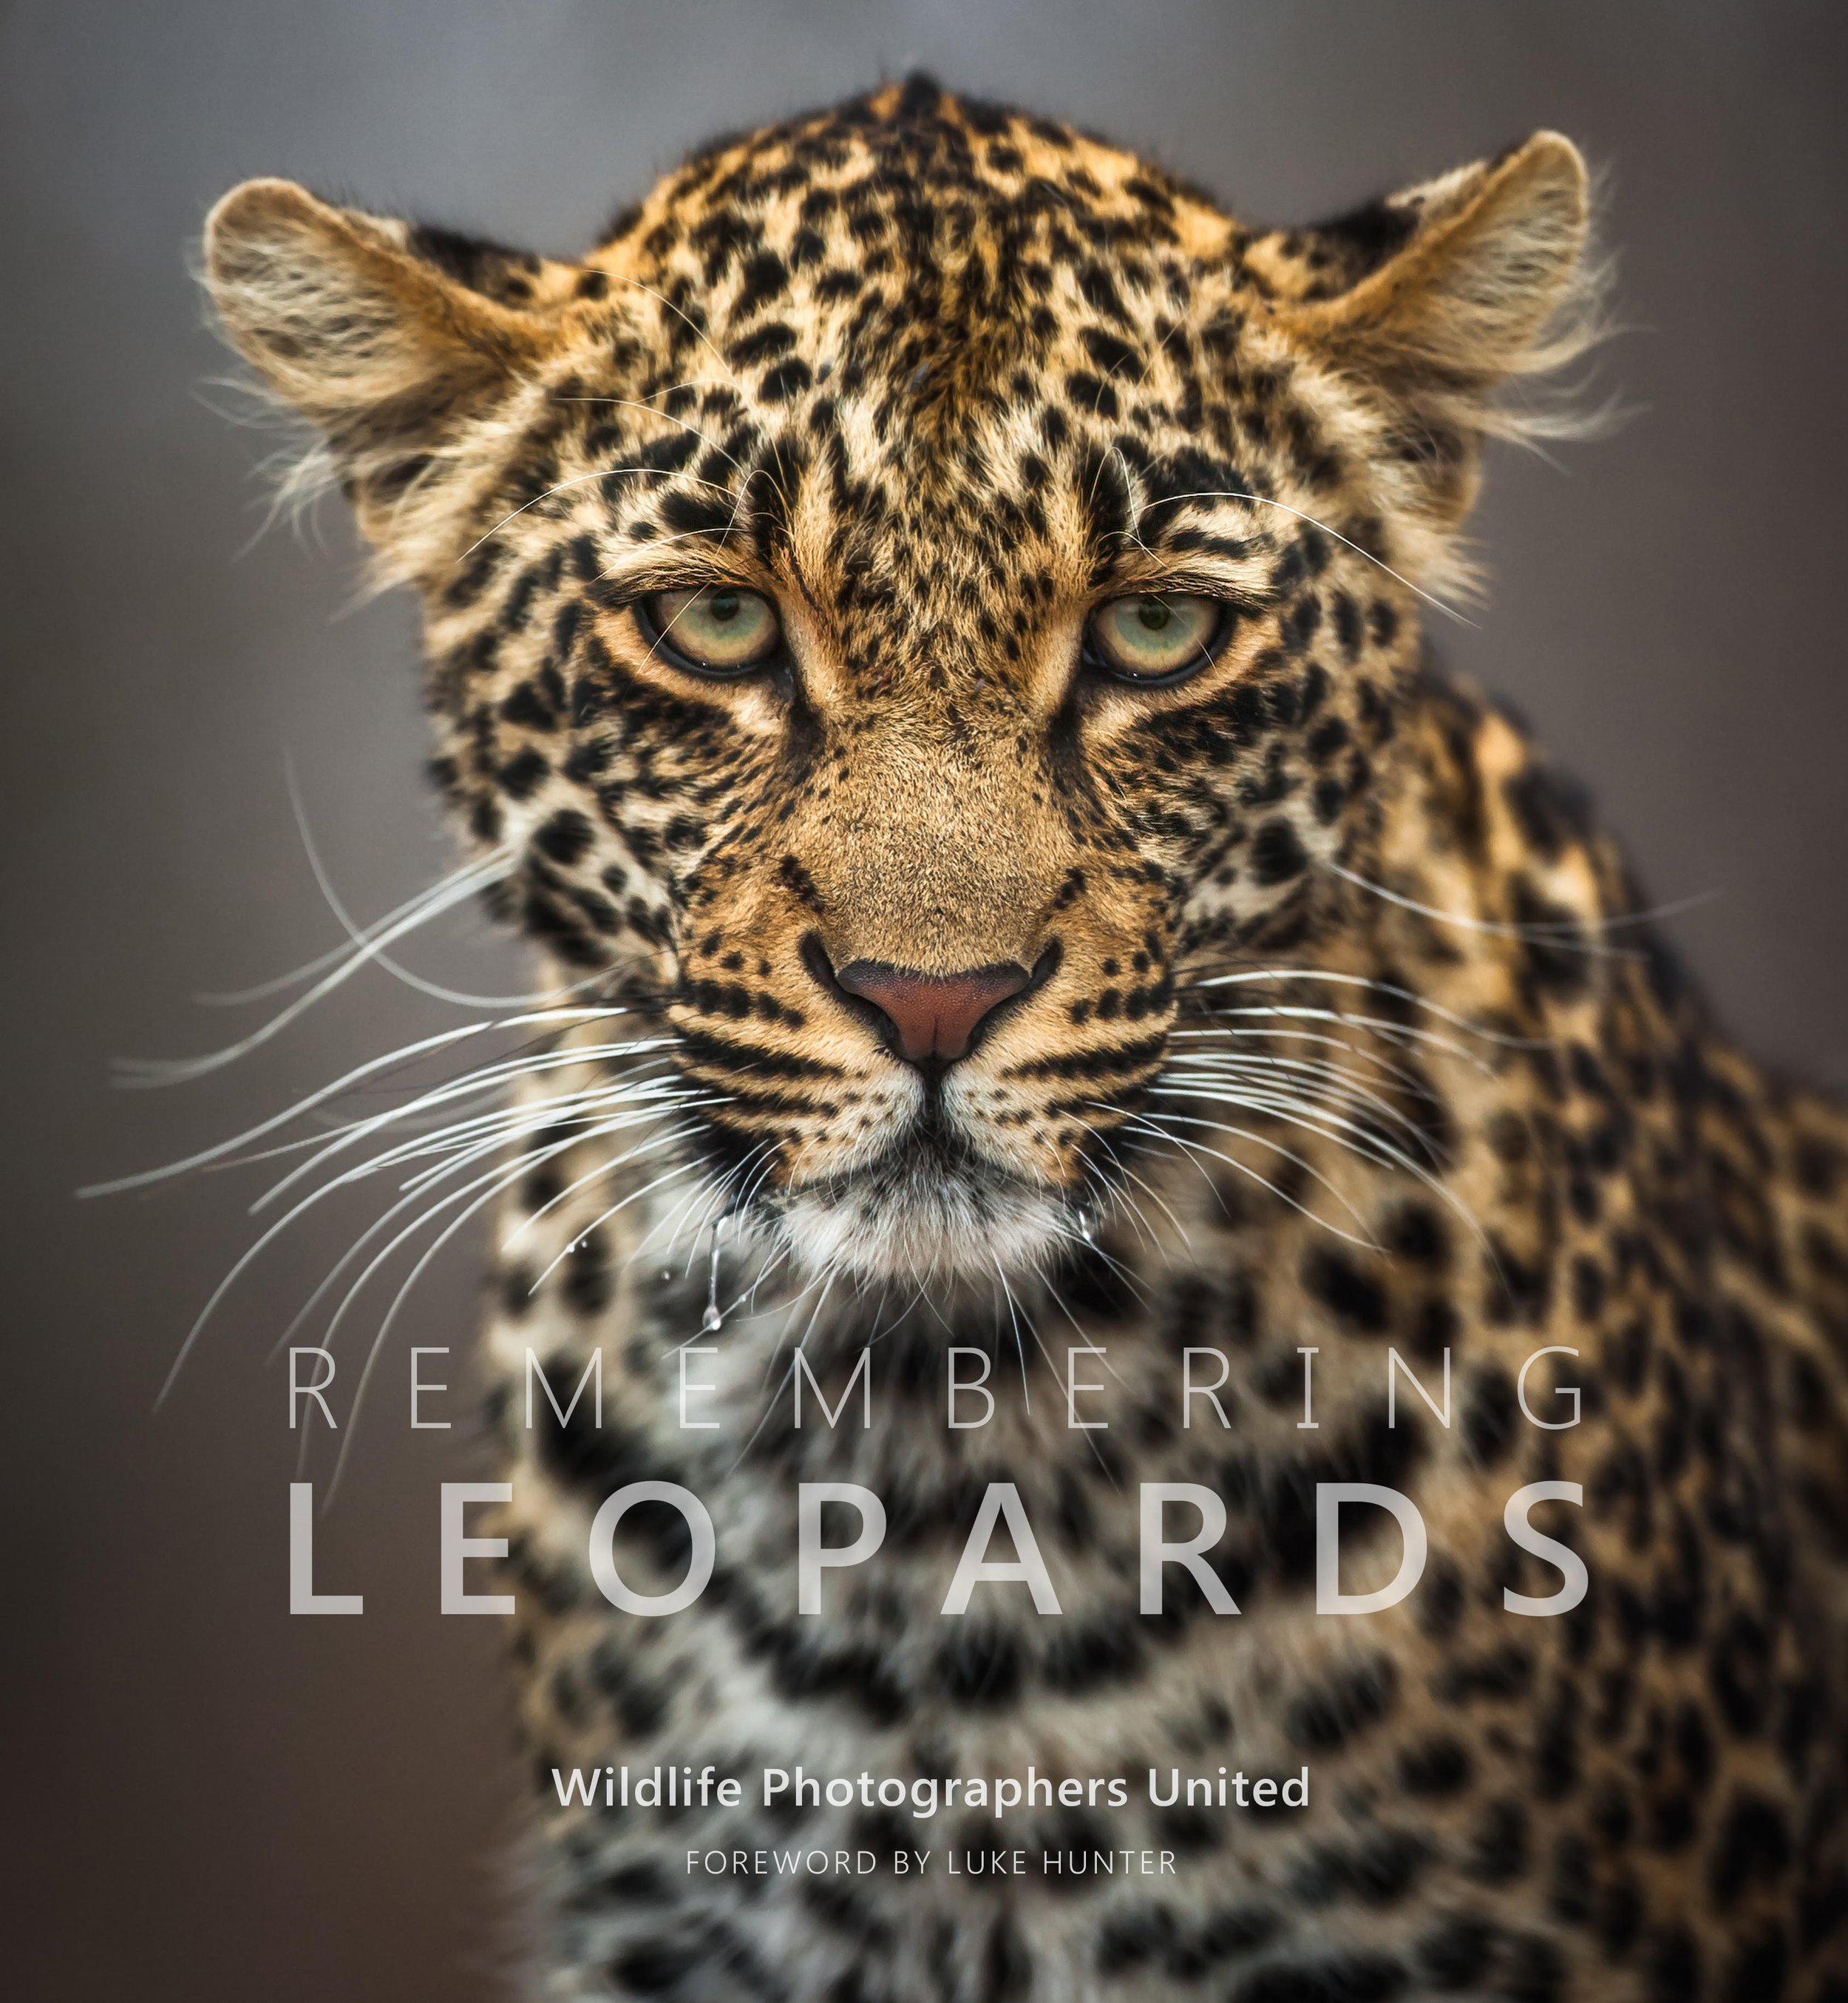 Remembering Leopards is the stunning eighth book in the Remembering Wildlife charity series. (Copy) (Copy) (Copy) (Copy) (Copy) (Copy) (Copy) (Copy) (Copy) (Copy) (Copy) (Copy) (Copy) (Copy)